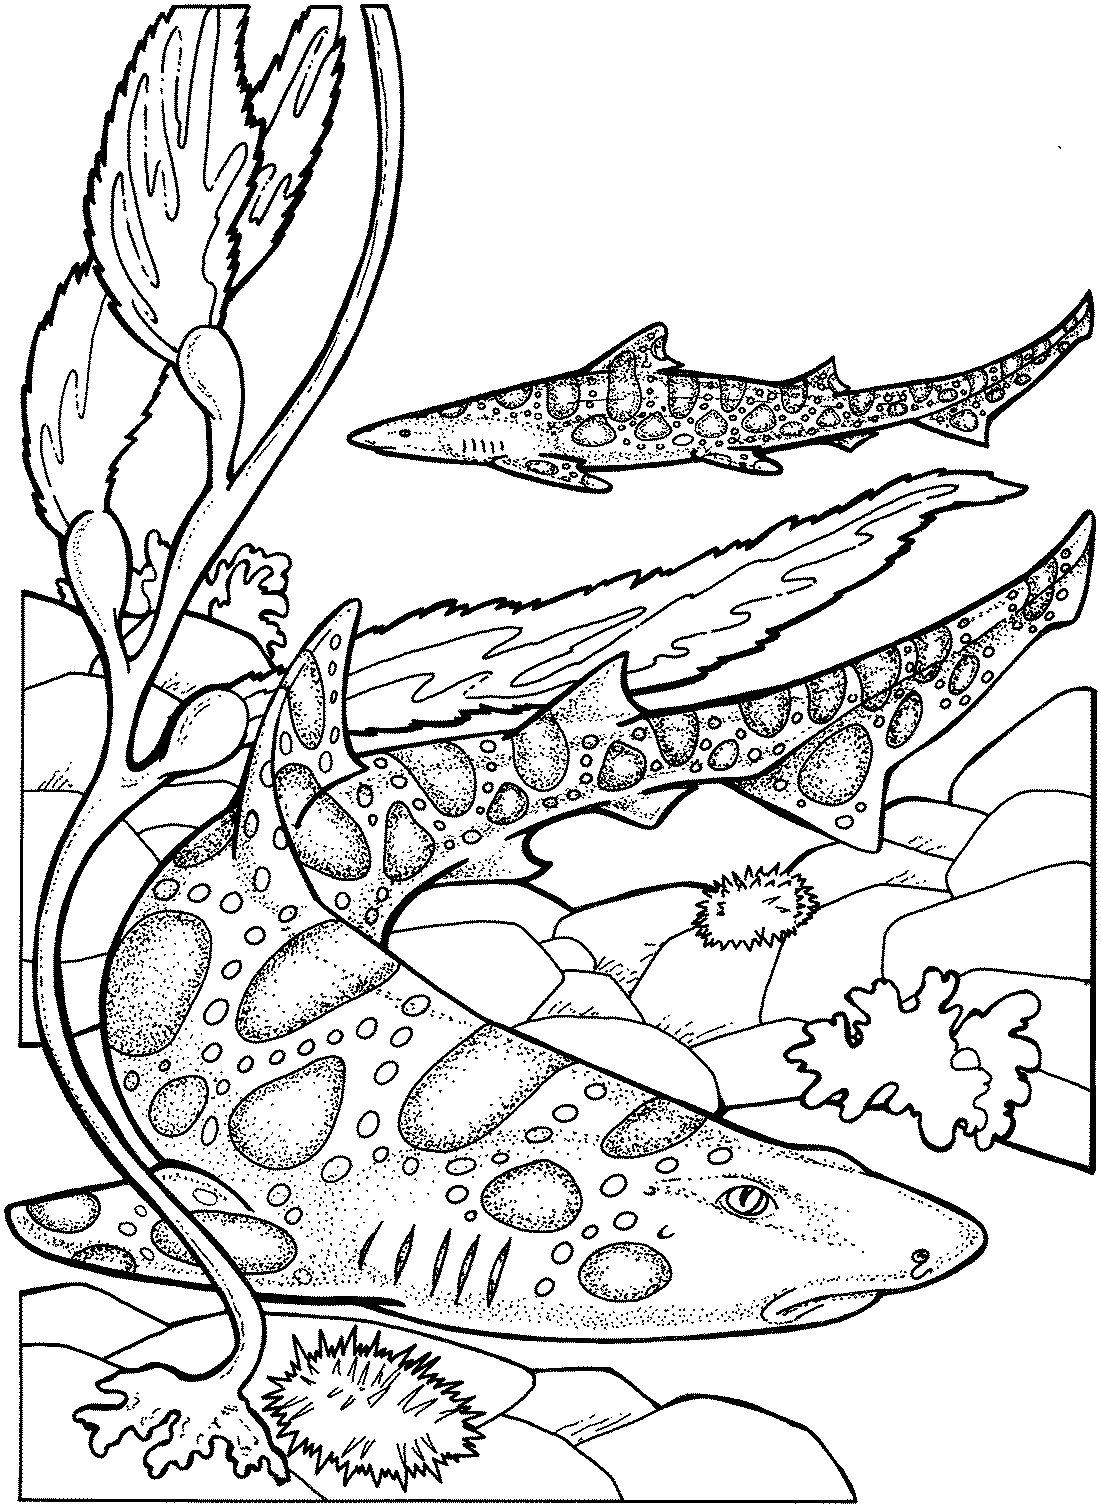 free coloring pages sharks free coloring page sharks of the world coloring book free sharks coloring pages 